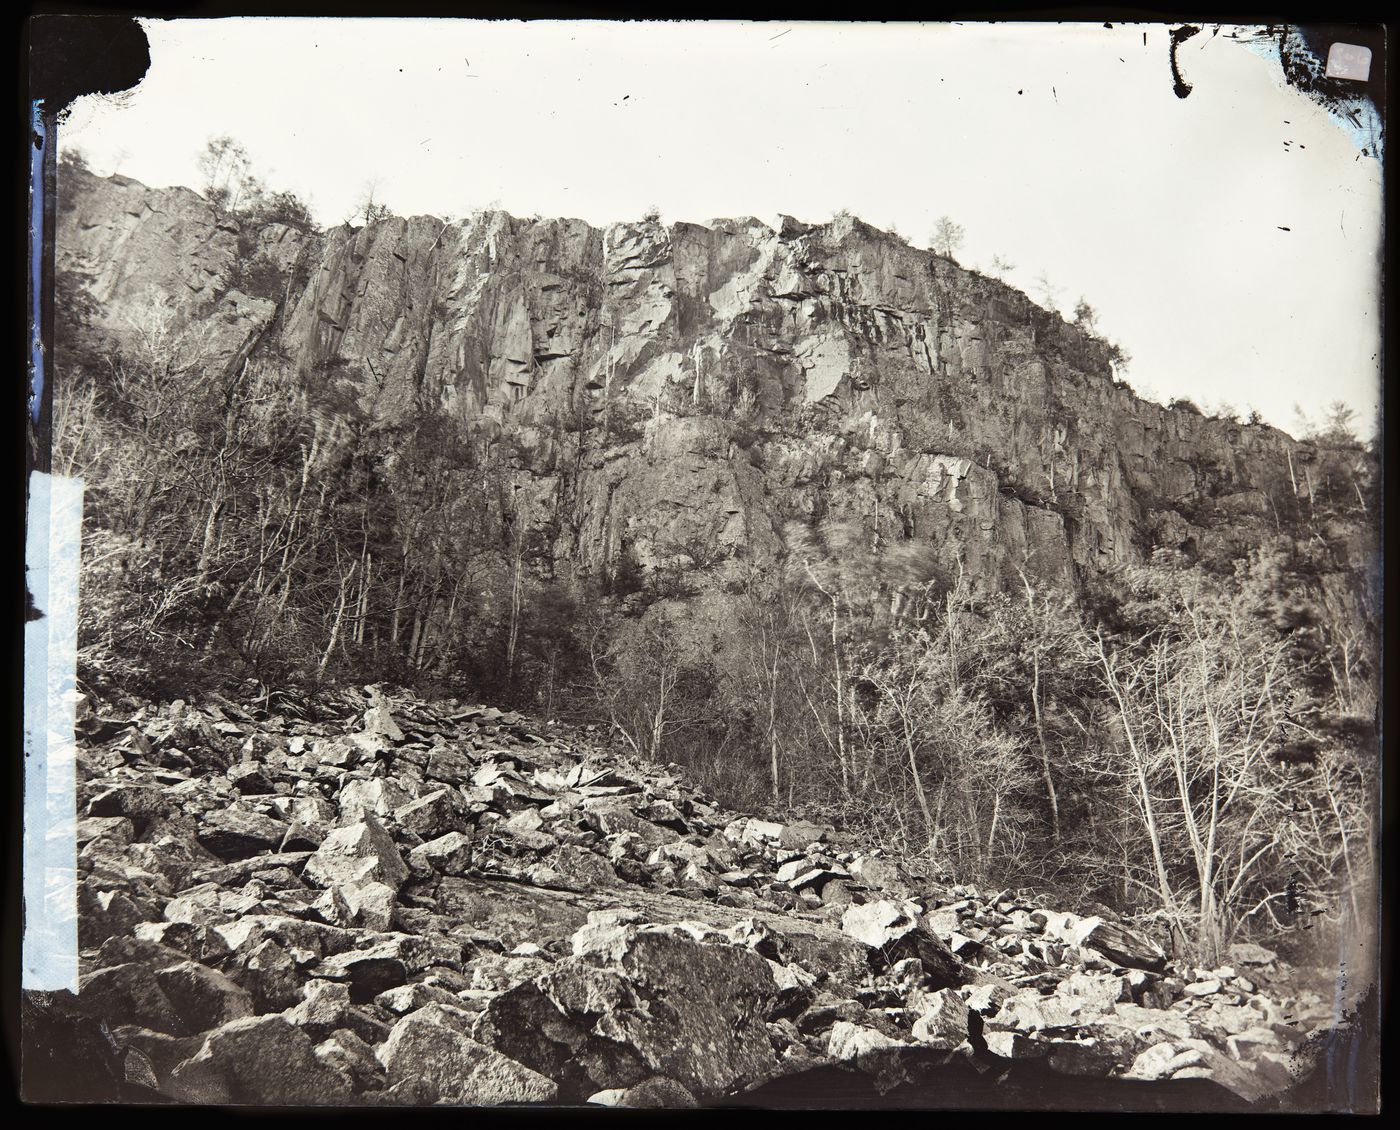 View of unidentified rock cliffs, United States of America